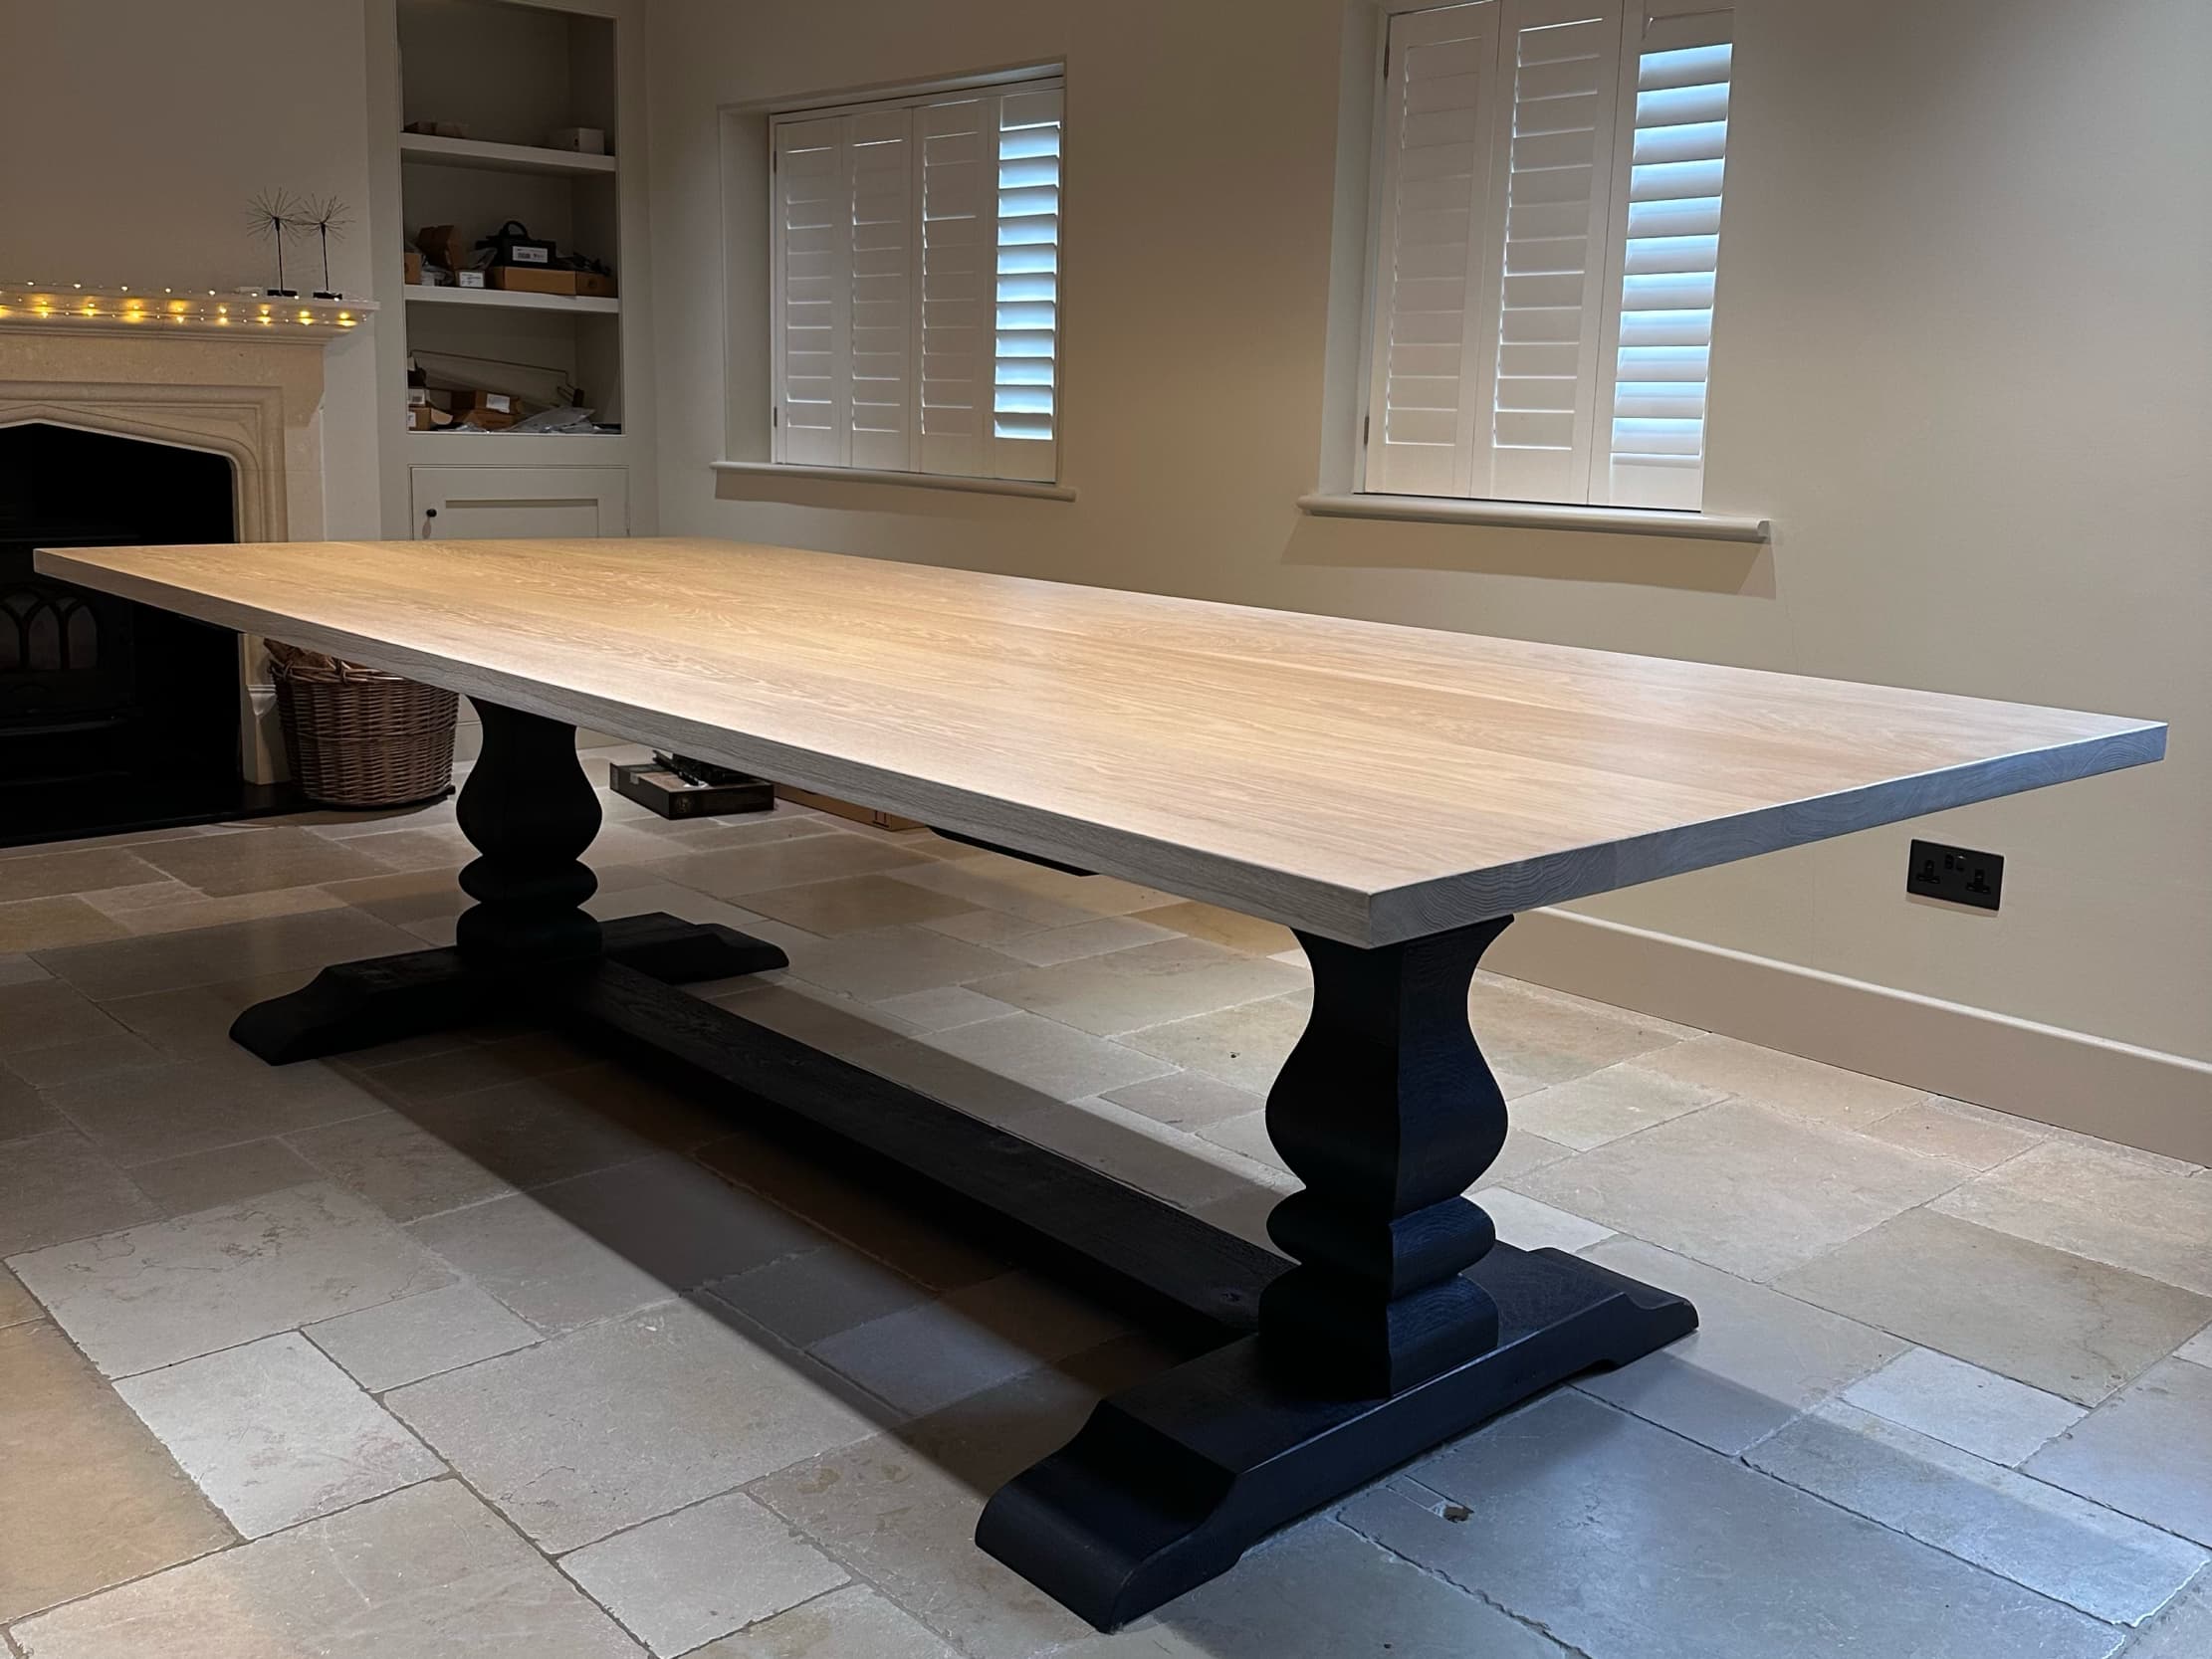 The 2nd Tom Marsh table delivered into this home was a real statement piece.